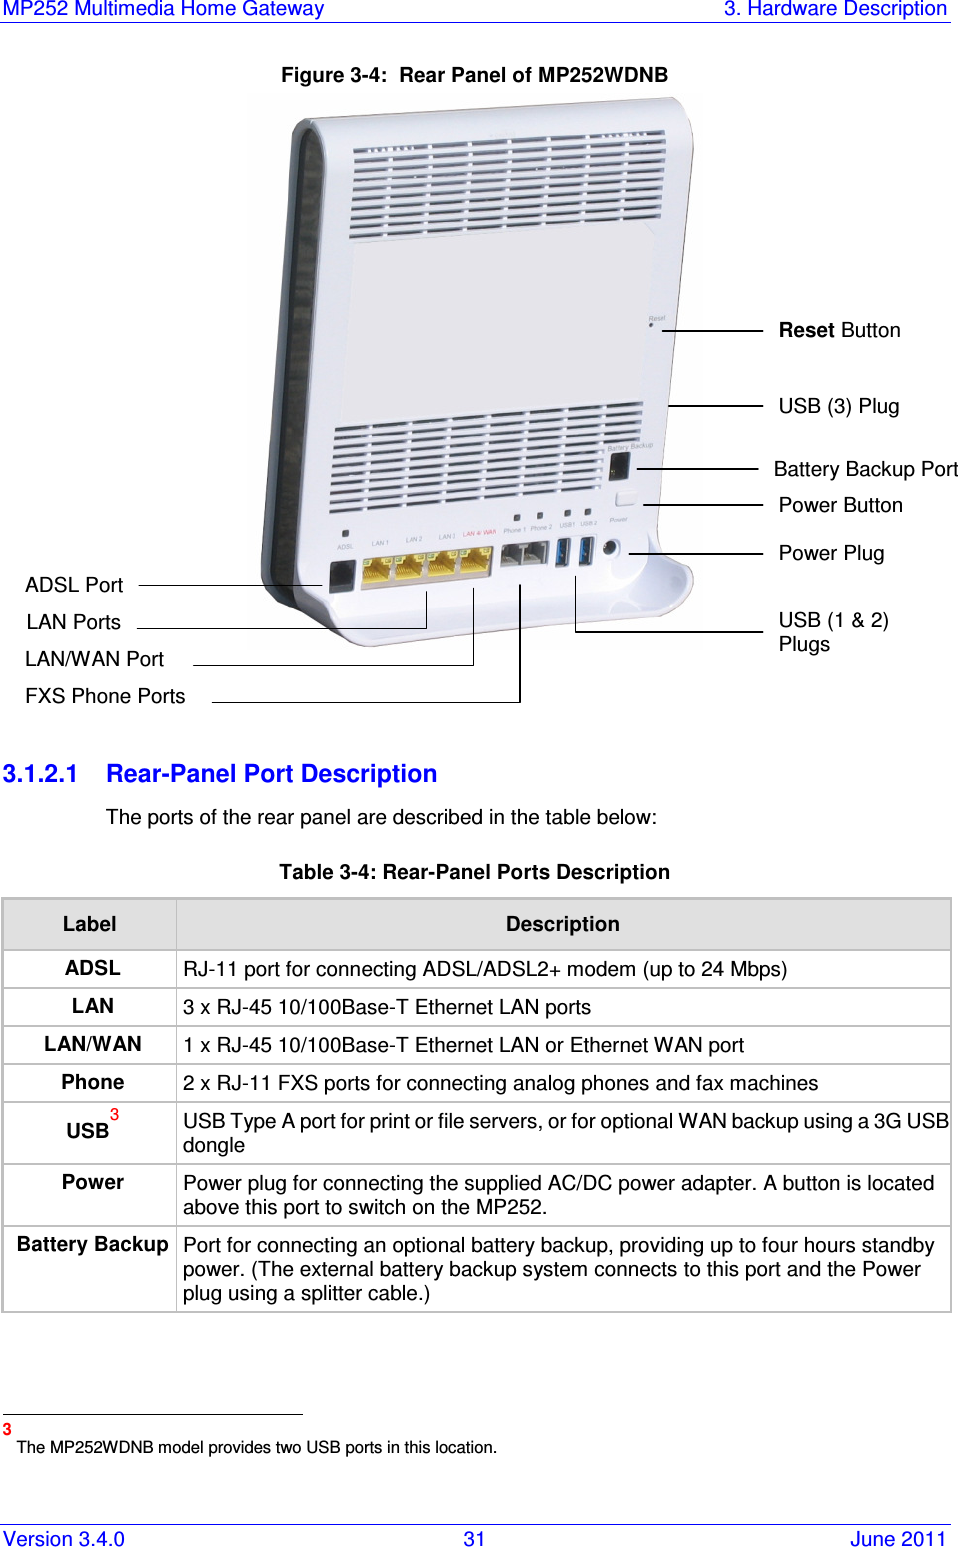 MP252 Multimedia Home Gateway  3. Hardware Description Version 3.4.0  31  June 2011 Figure 3-4:  Rear Panel of MP252WDNB    3.1.2.1  Rear-Panel Port Description The ports of the rear panel are described in the table below: Table 3-4: Rear-Panel Ports Description Label  Description ADSL  RJ-11 port for connecting ADSL/ADSL2+ modem (up to 24 Mbps) LAN  3 x RJ-45 10/100Base-T Ethernet LAN ports LAN/WAN  1 x RJ-45 10/100Base-T Ethernet LAN or Ethernet WAN port Phone  2 x RJ-11 FXS ports for connecting analog phones and fax machines USB3 USB Type A port for print or file servers, or for optional WAN backup using a 3G USB dongle Power  Power plug for connecting the supplied AC/DC power adapter. A button is located above this port to switch on the MP252. Battery Backup Port for connecting an optional battery backup, providing up to four hours standby power. (The external battery backup system connects to this port and the Power plug using a splitter cable.)                                                       3 The MP252WDNB model provides two USB ports in this location. Reset Button Battery Backup Port Power Plug USB (3) Plug FXS Phone Ports LAN/WAN Port ADSL Port LAN Ports USB (1 &amp; 2) Plugs Power Button 